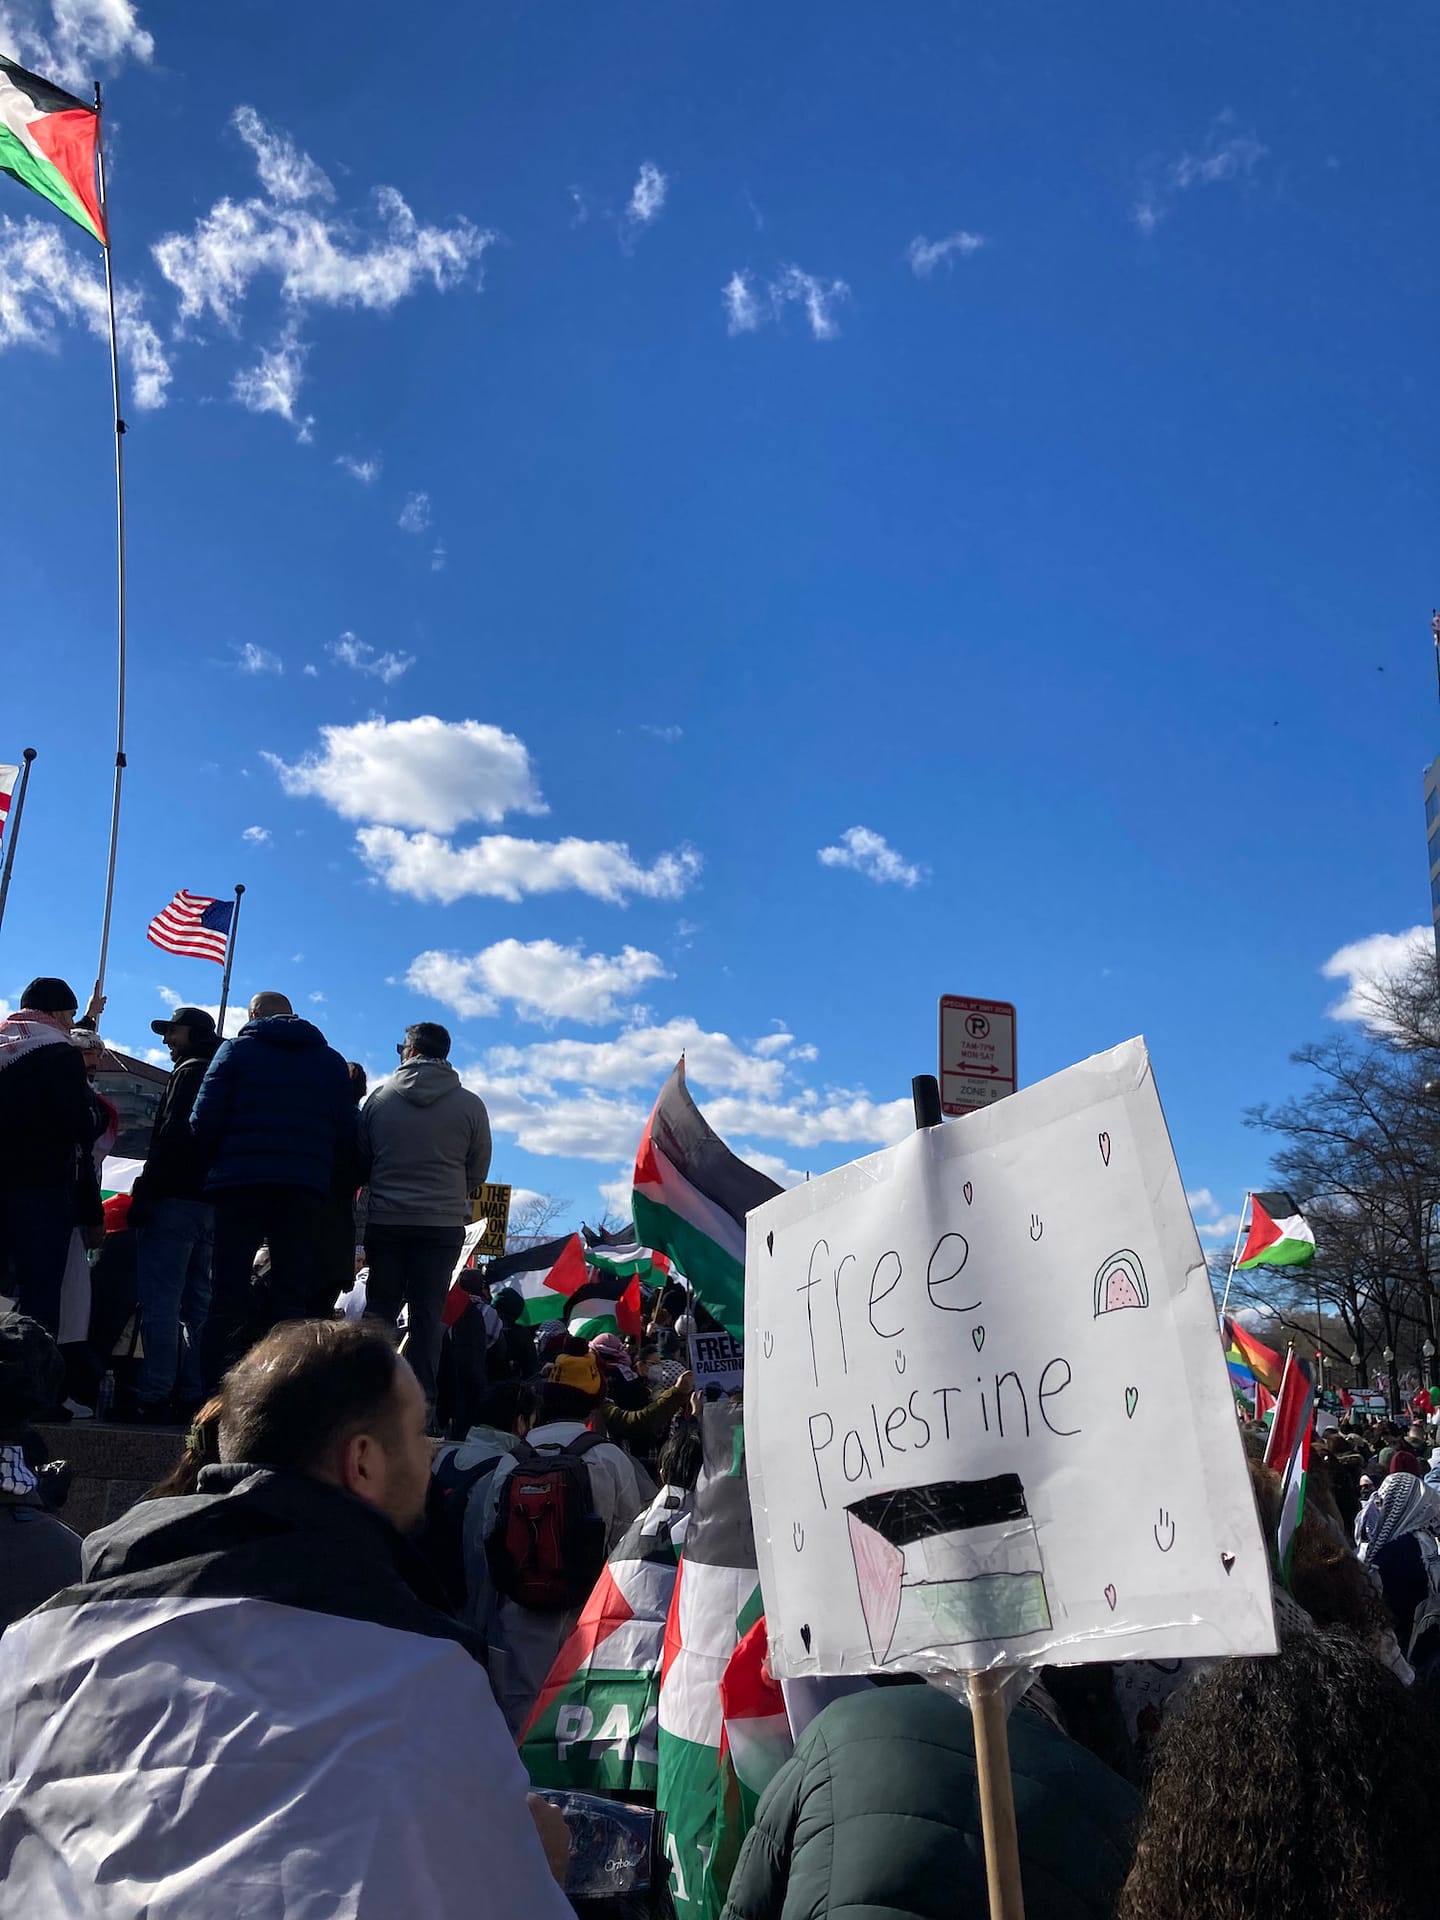 Mainstream News Fails To Cover March for Gaza in DC